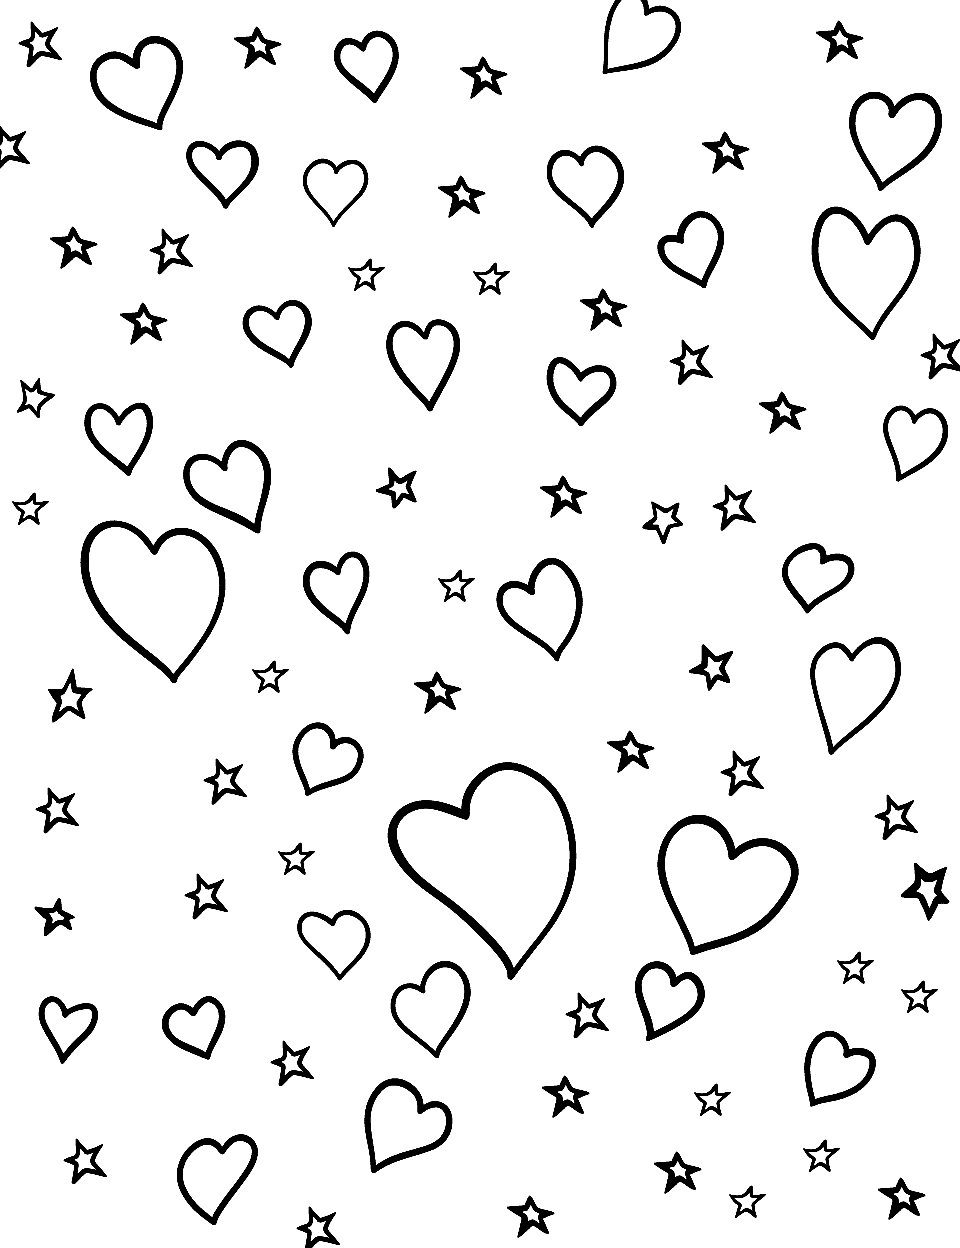 Stars and Hearts Star Coloring Page - A pattern of stars and hearts.